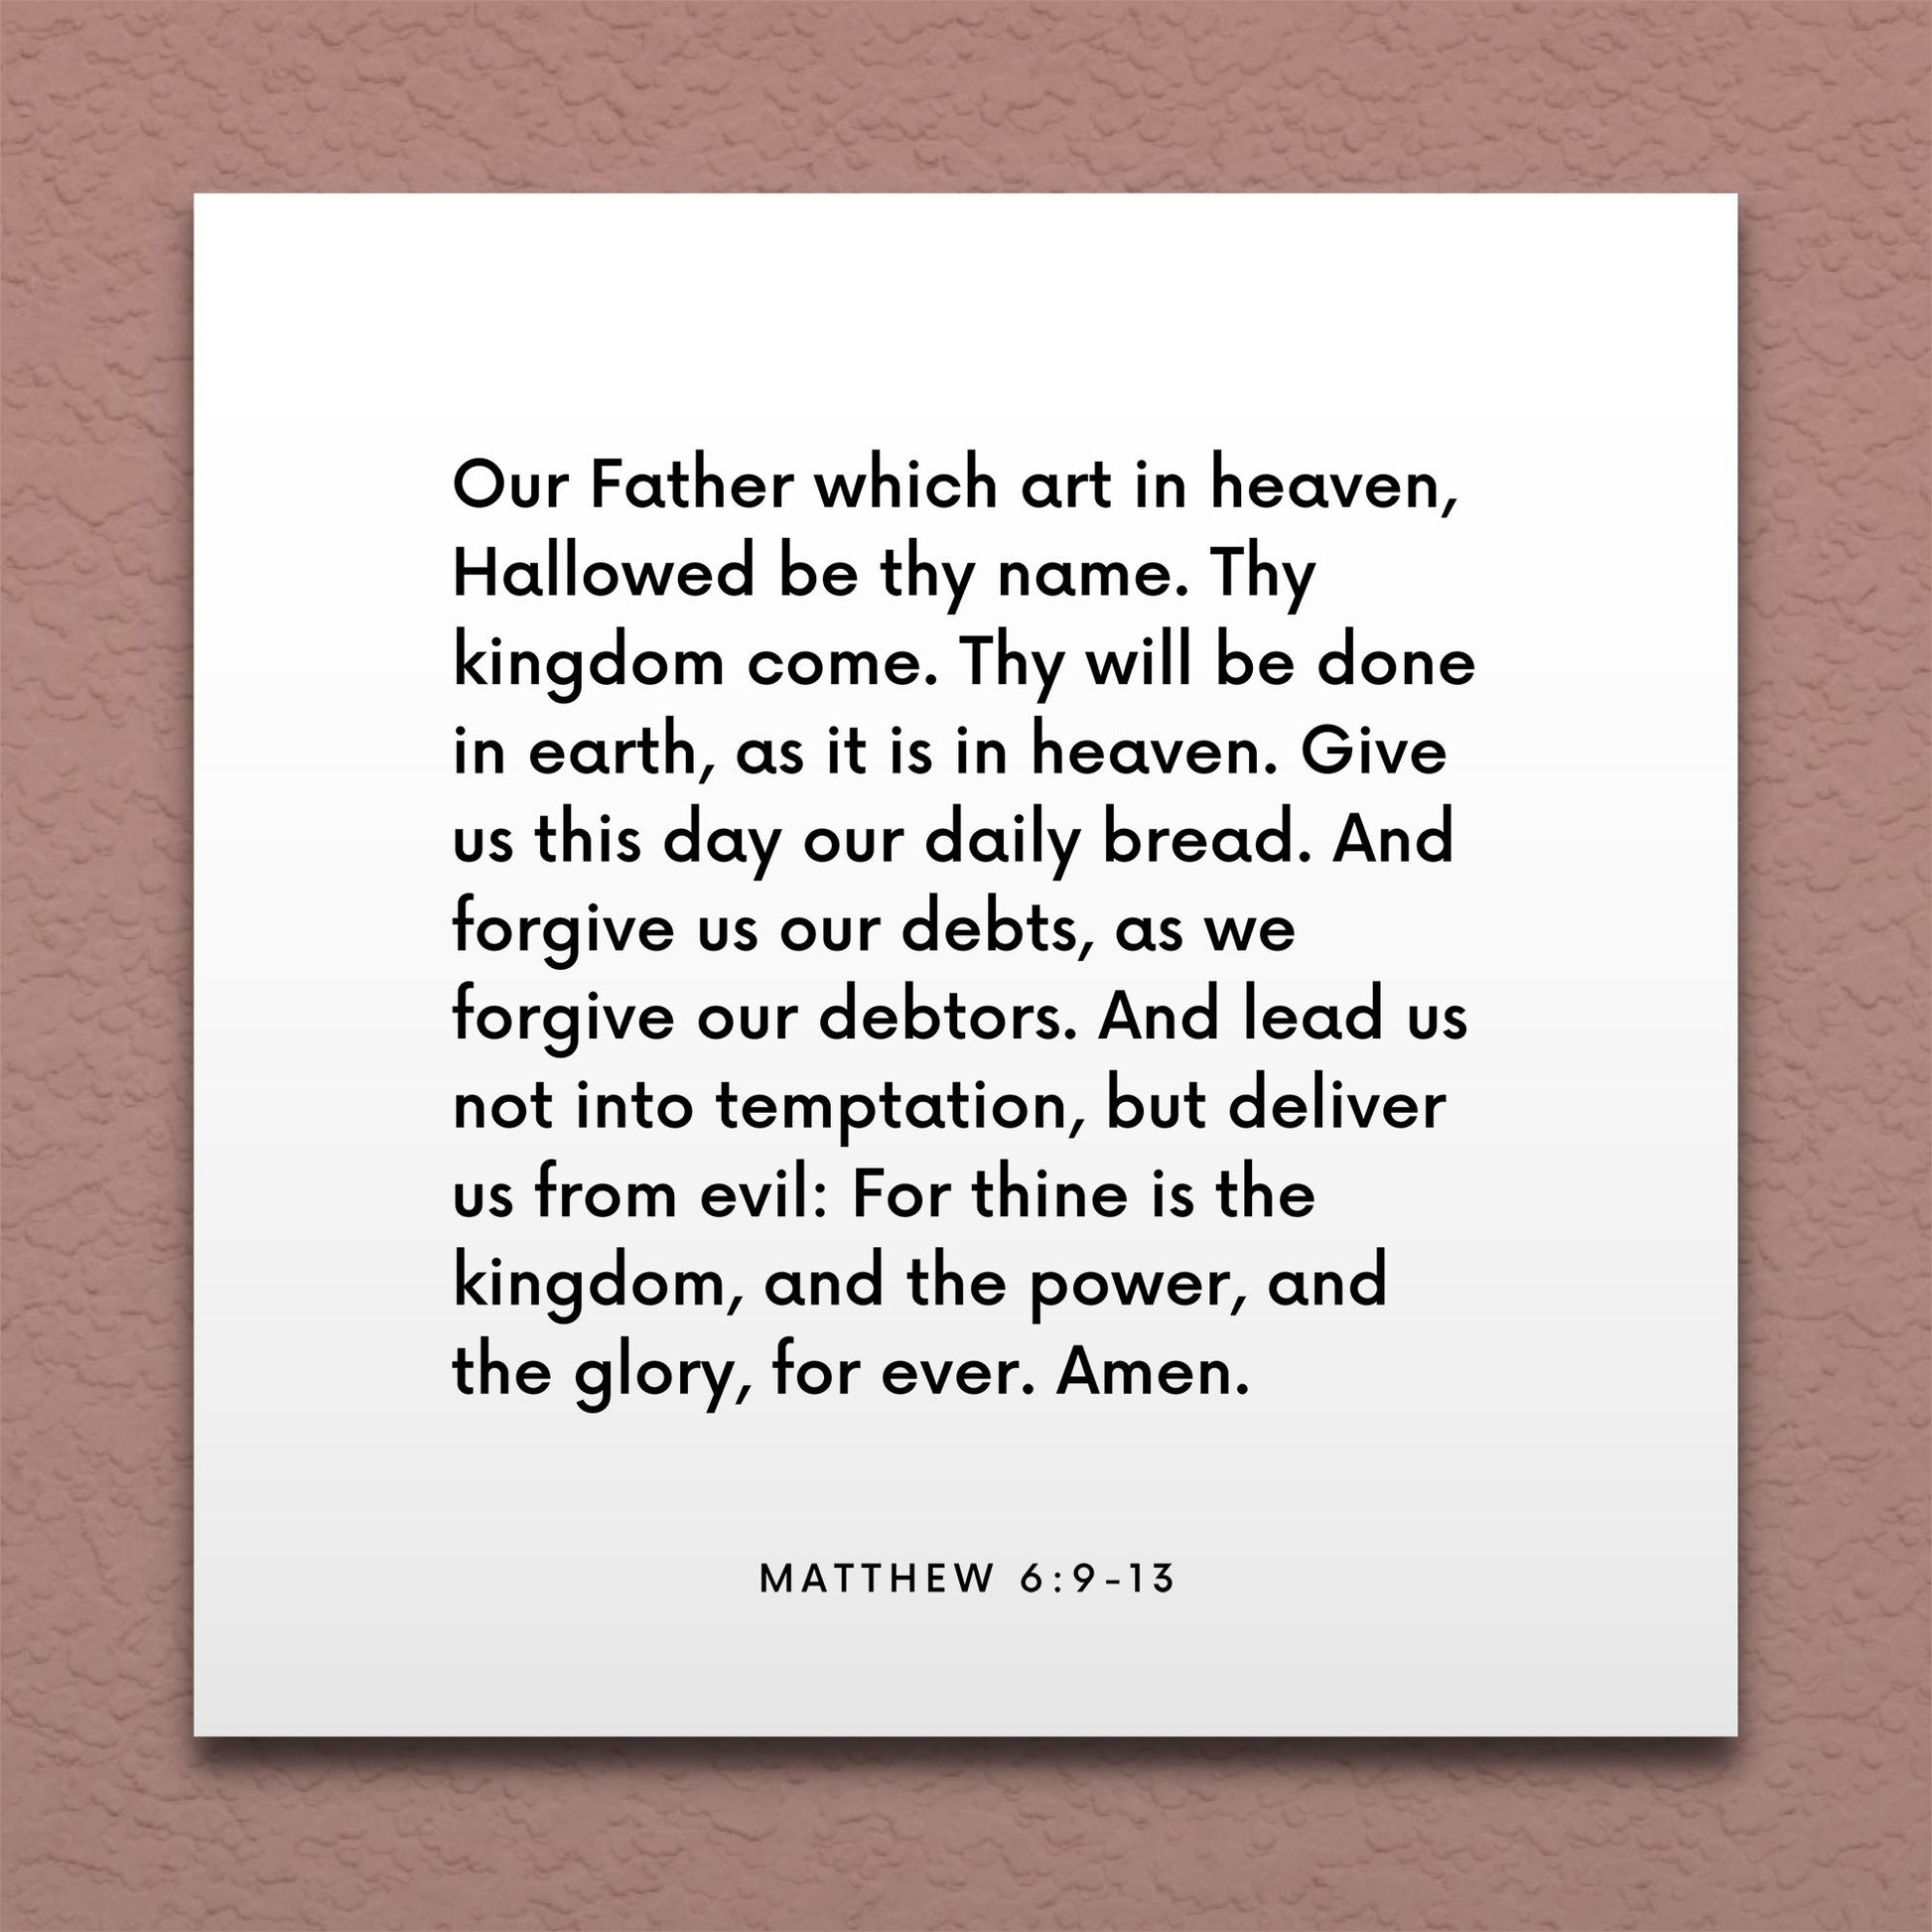 Wall-mounted scripture tile for Matthew 6:9-13 - "Our Father which art in heaven, Hallowed be thy name"